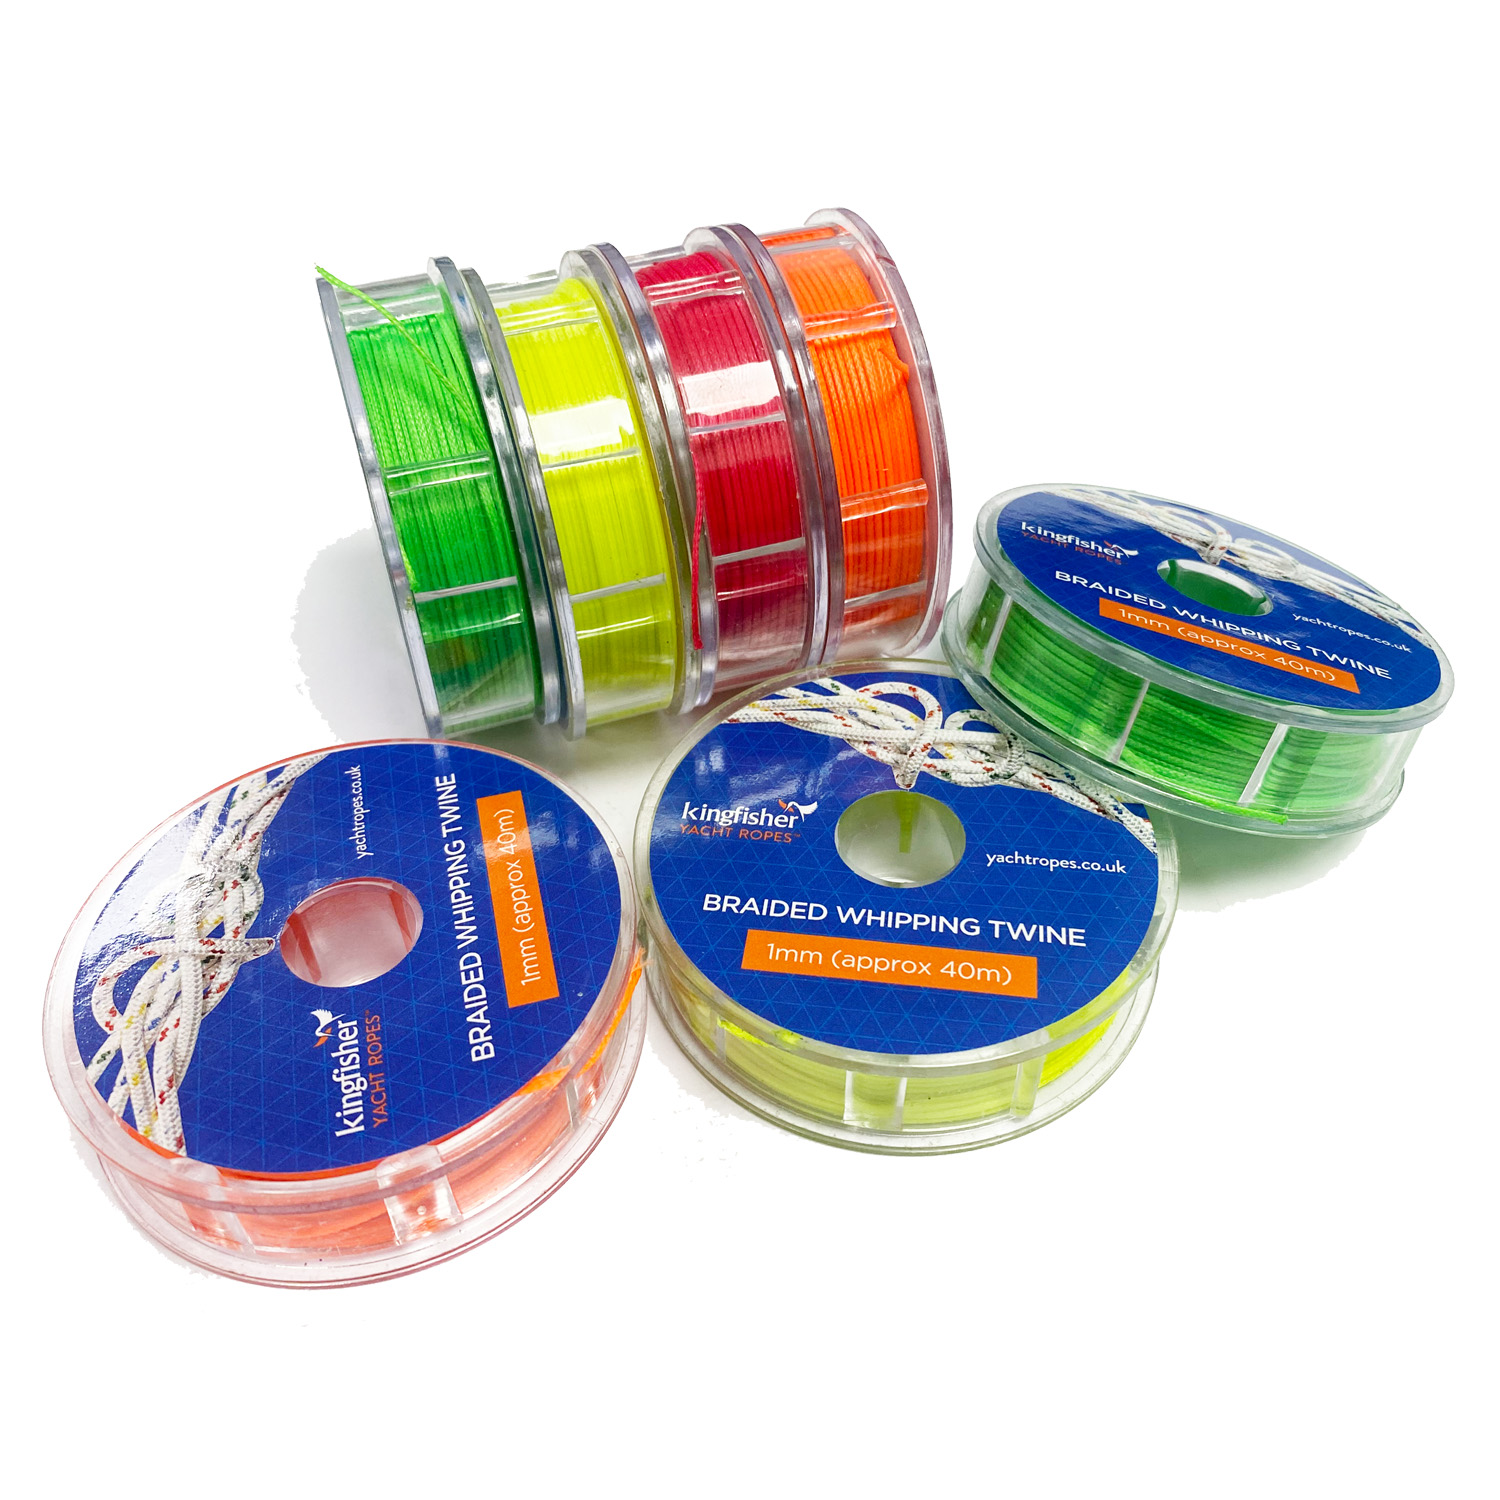 https://www.coastwatersports.com/images/products/Kingfisher-Neon-Whipping-Twine.jpg